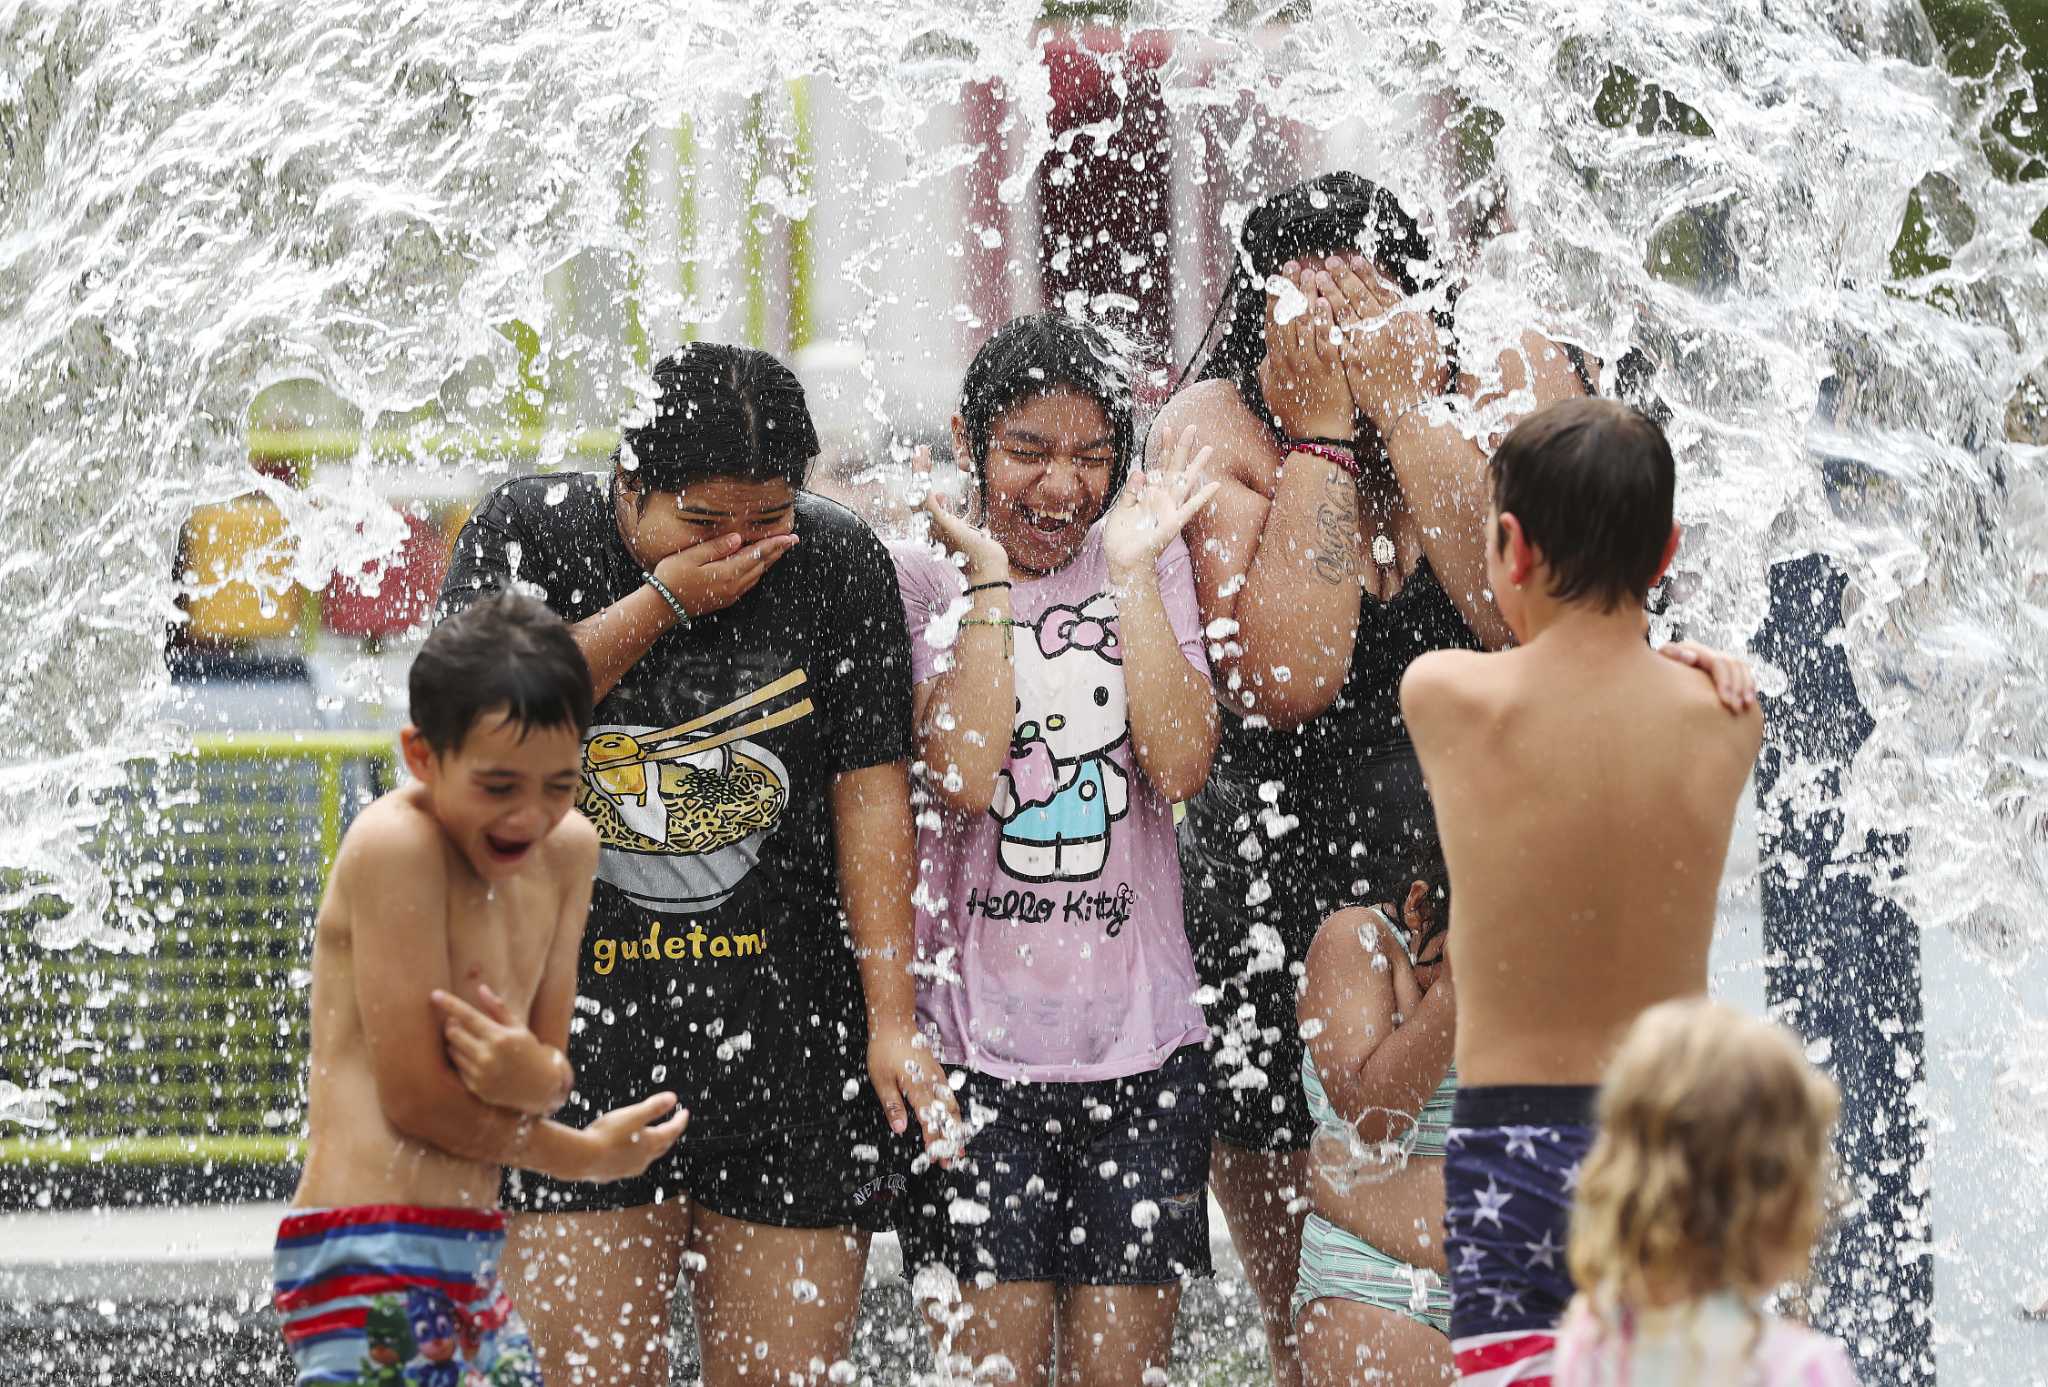 Record-breaking US heat wave scorches the Midwest and Northeast, bringing safety measures